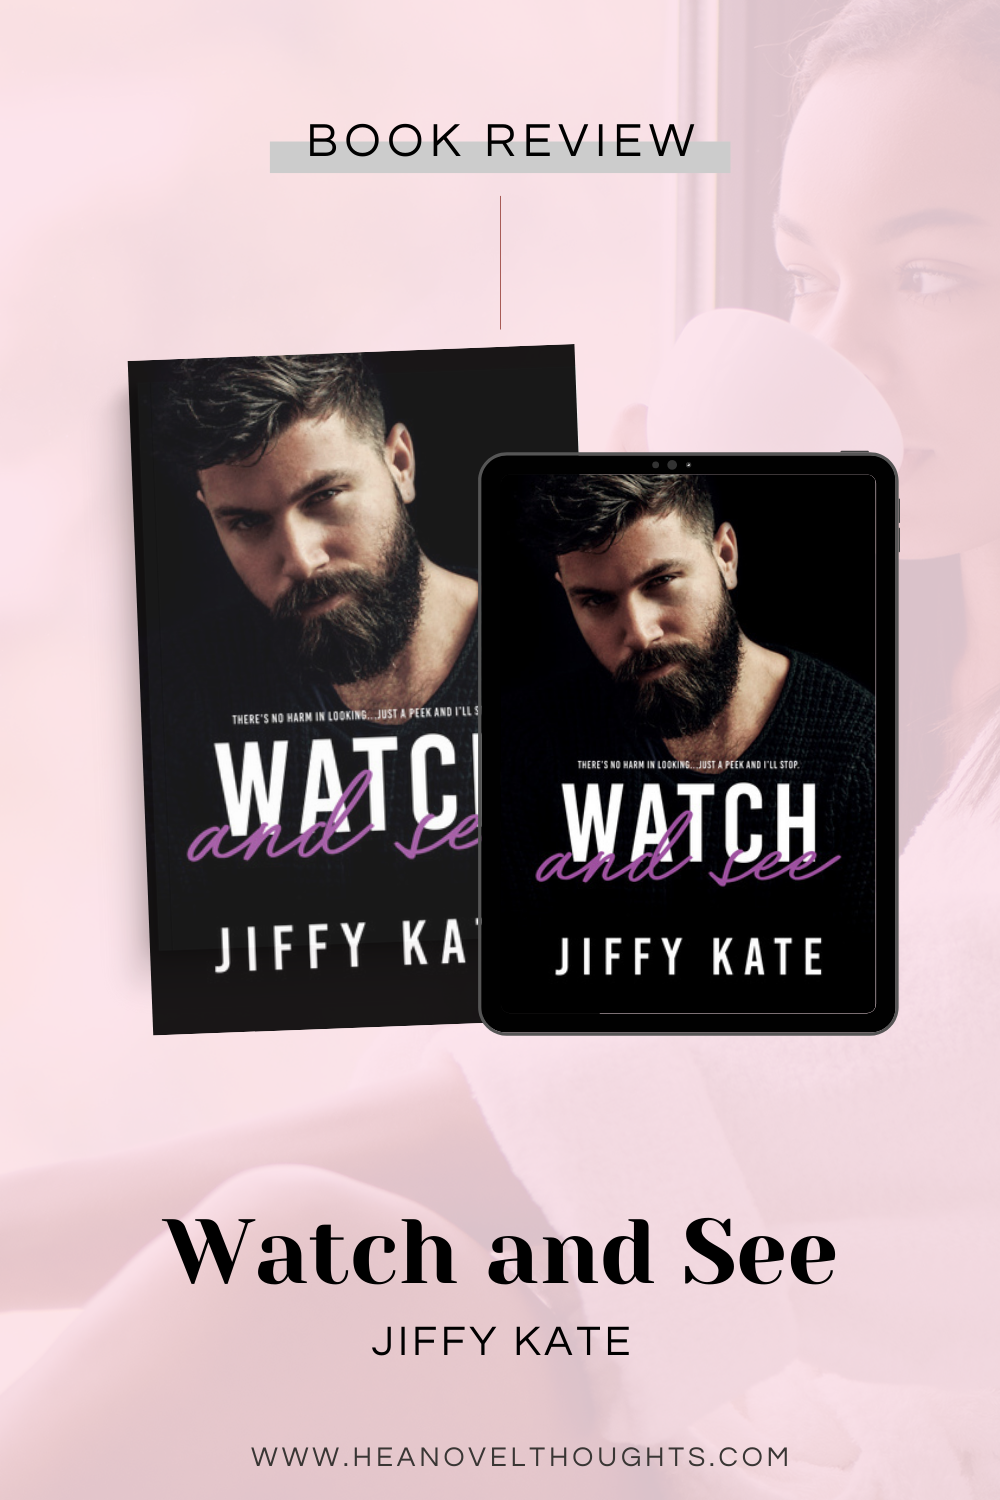 Watch and See by Jiffy Kate